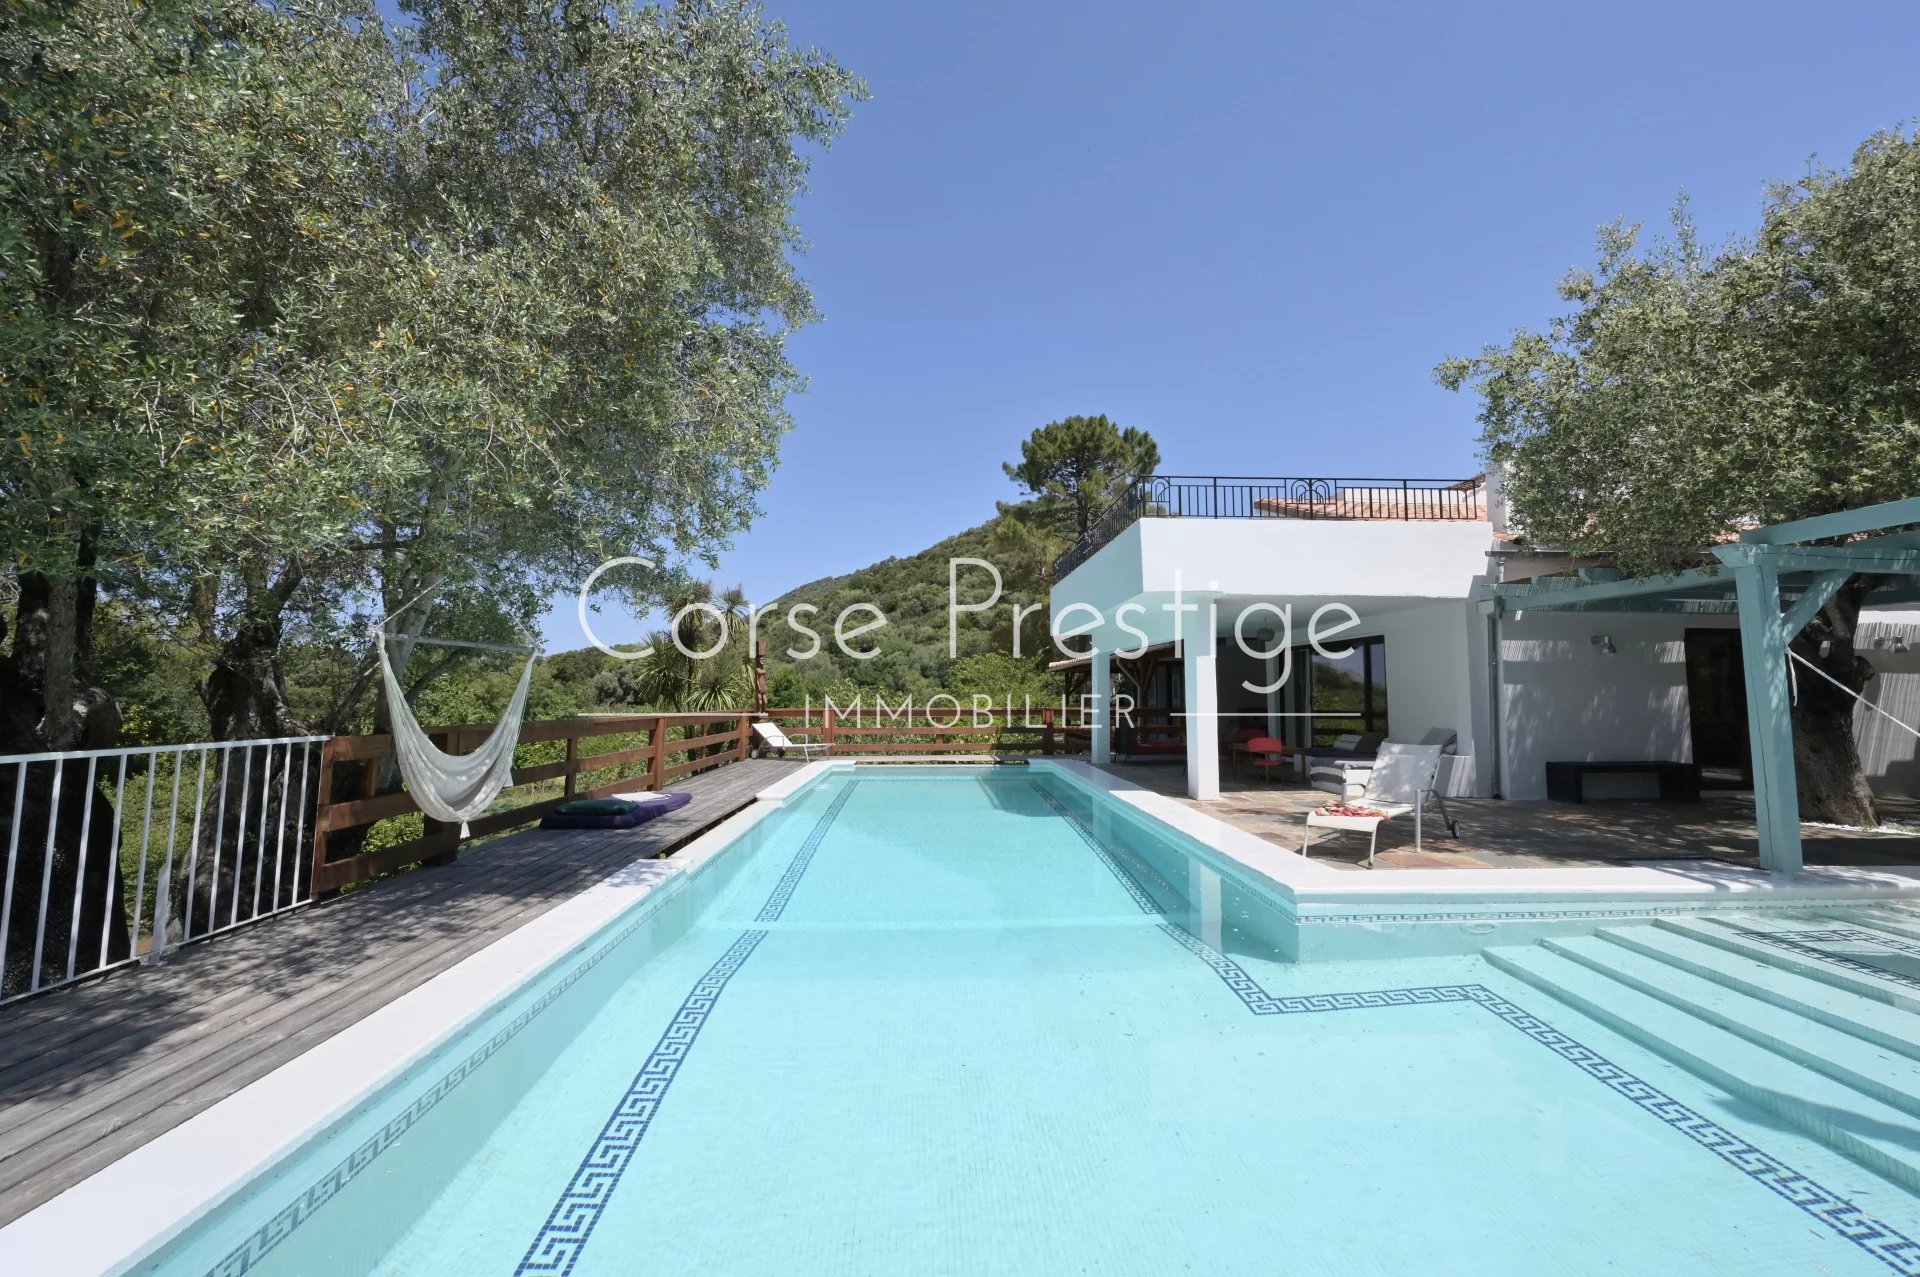 unique character property for sale in north corsica by the sea image3